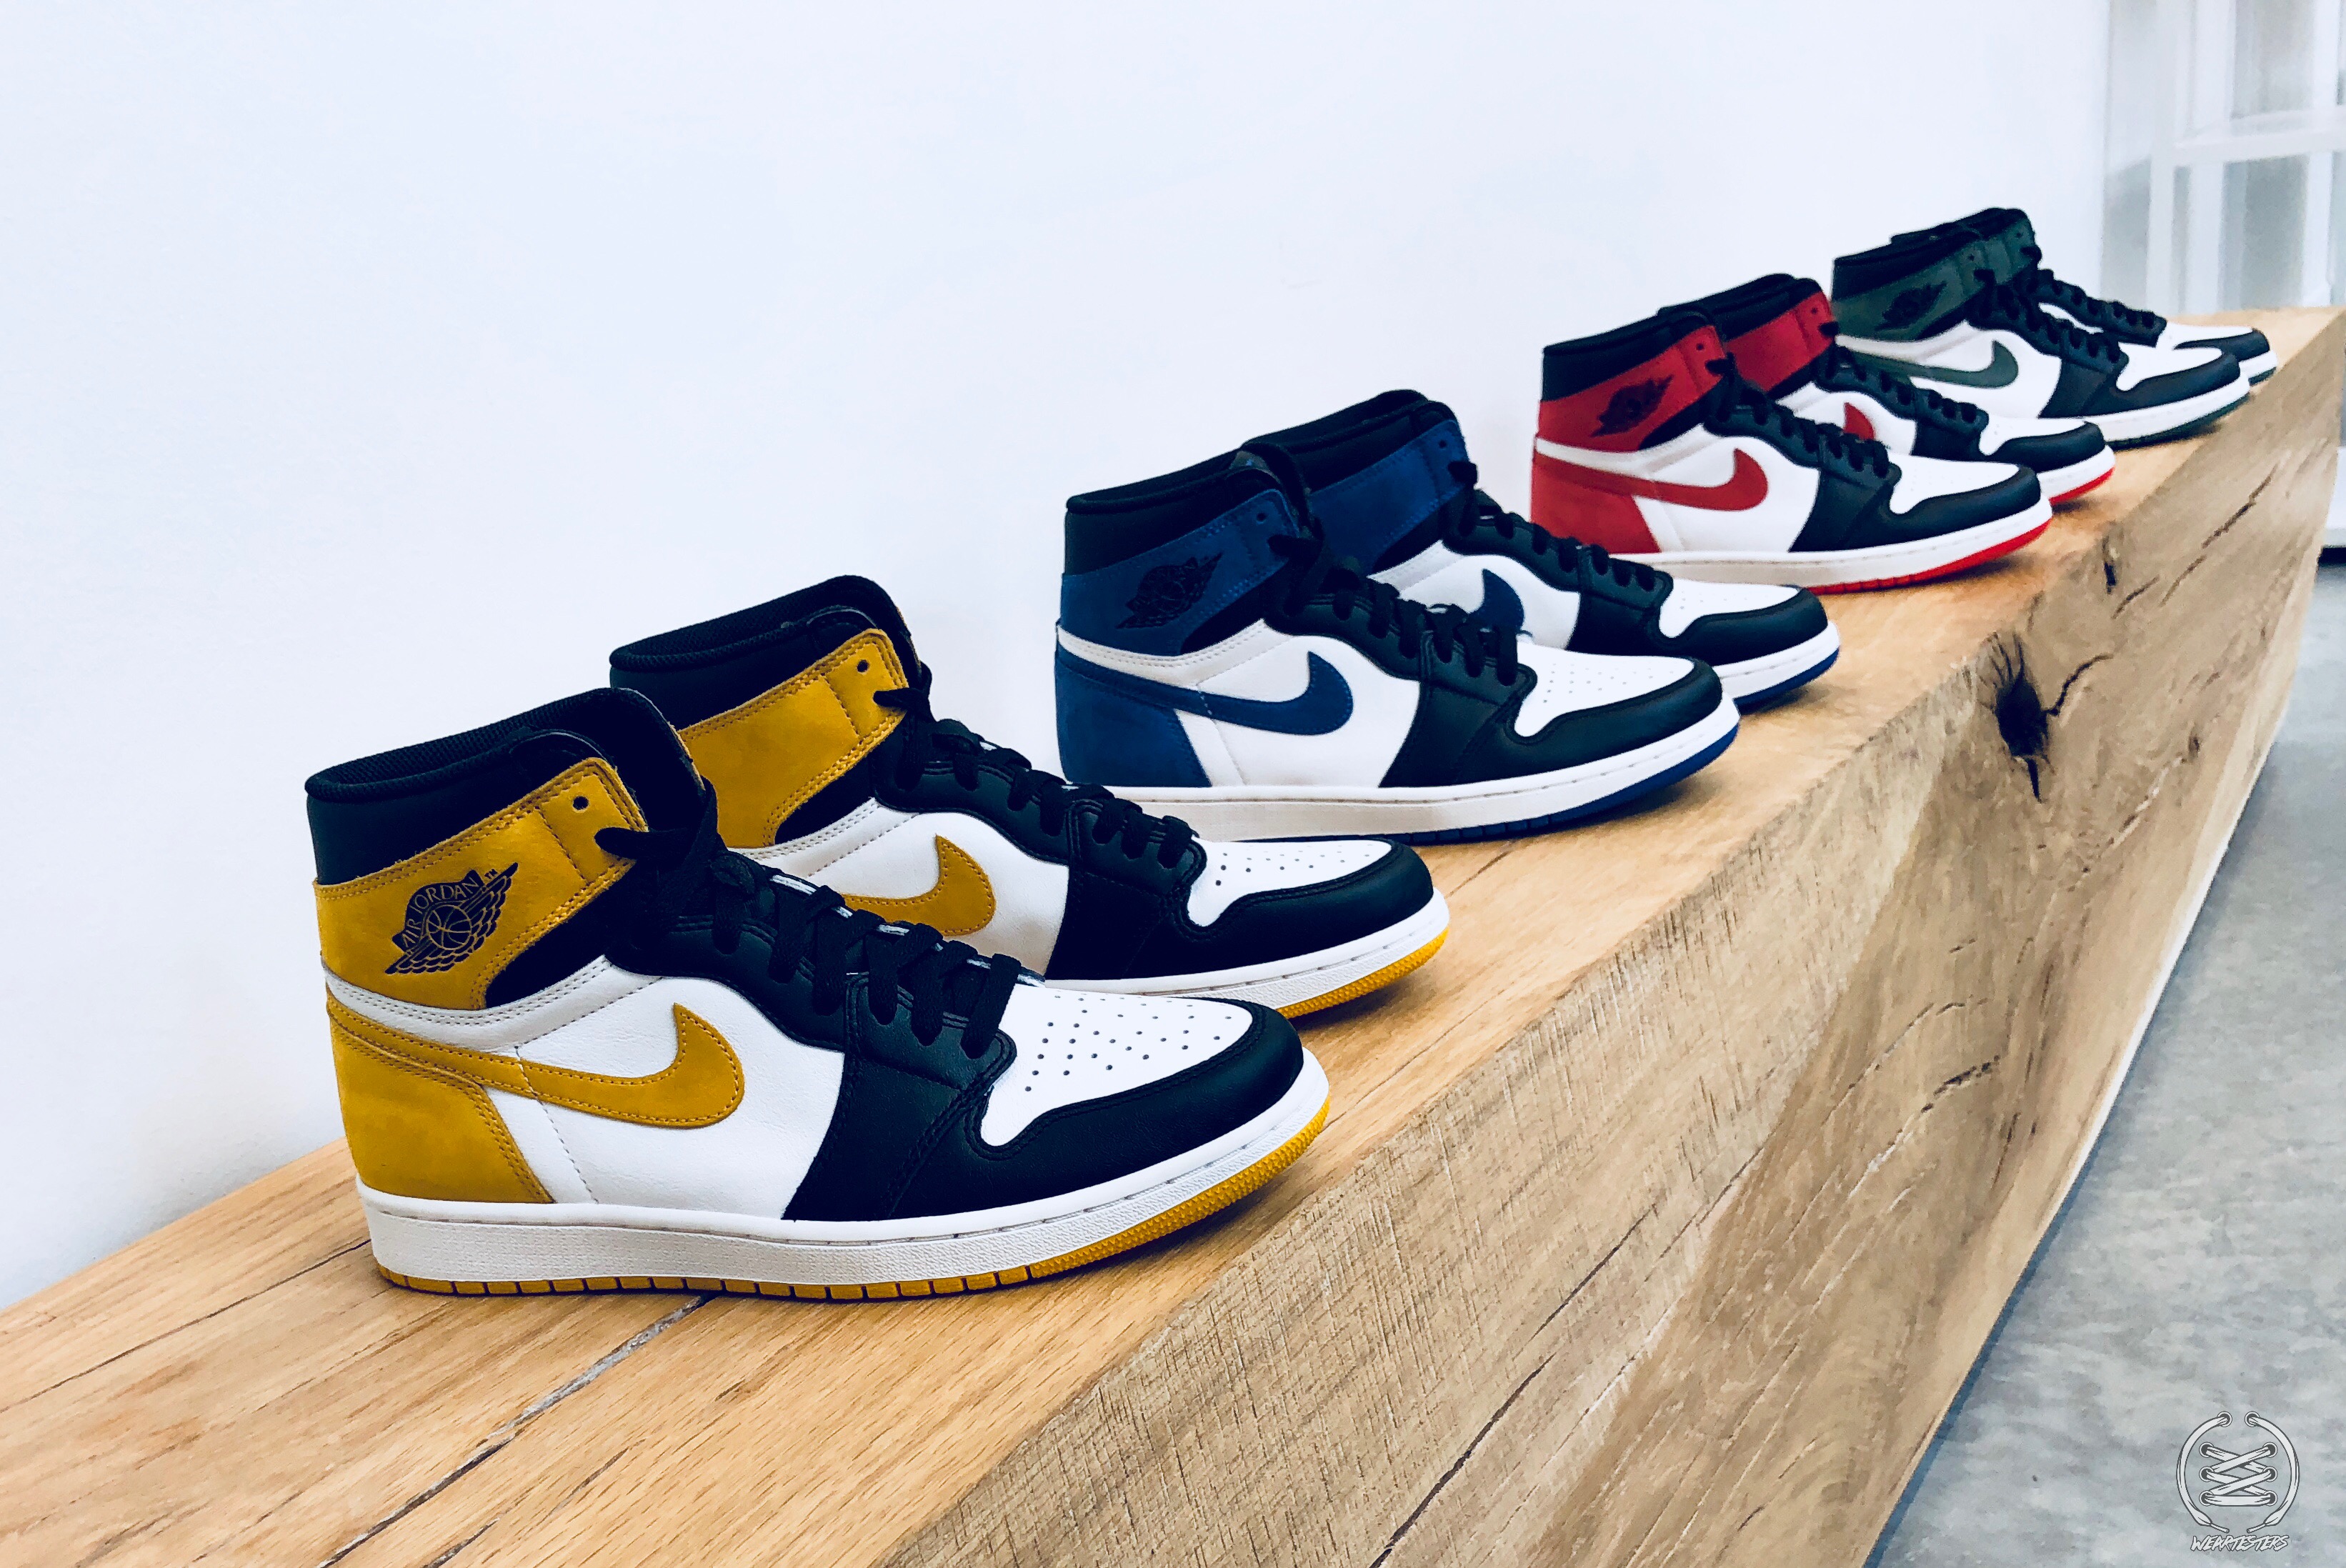 Air Jordan 1 Best Hand in the Game collection